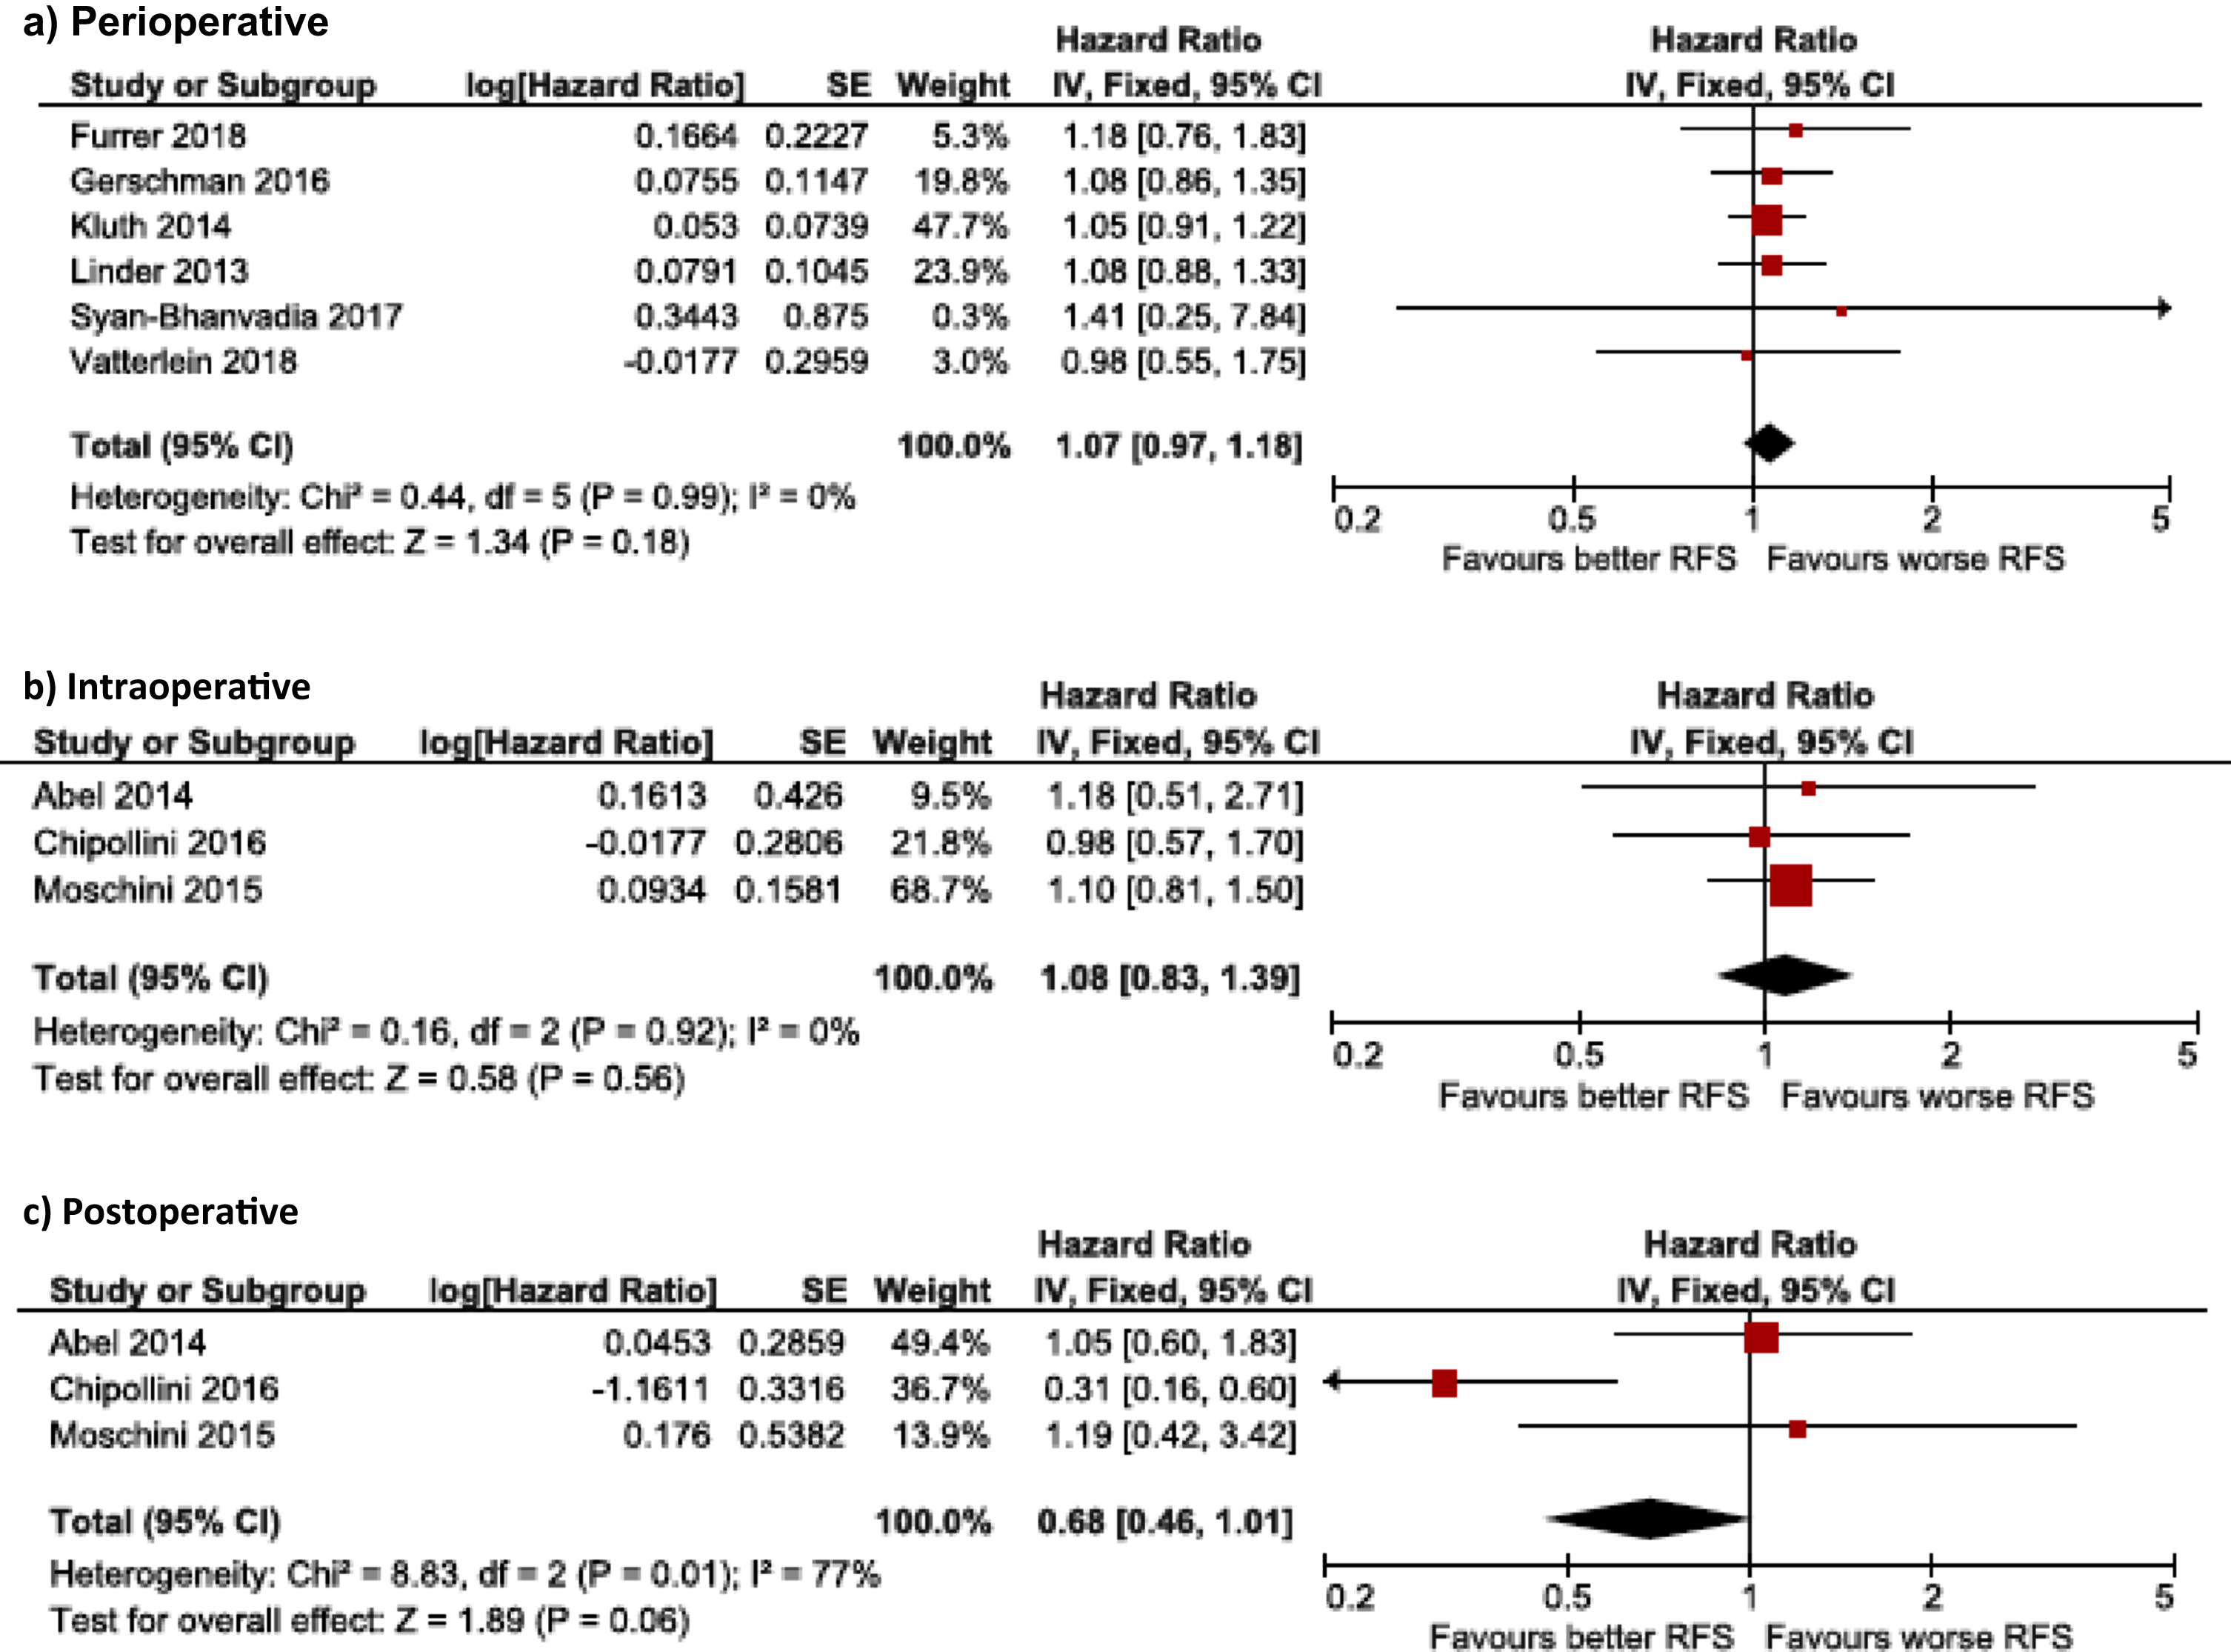 Impact of RBC transfusion on RFS in peri-, intra- and postoperative setting.